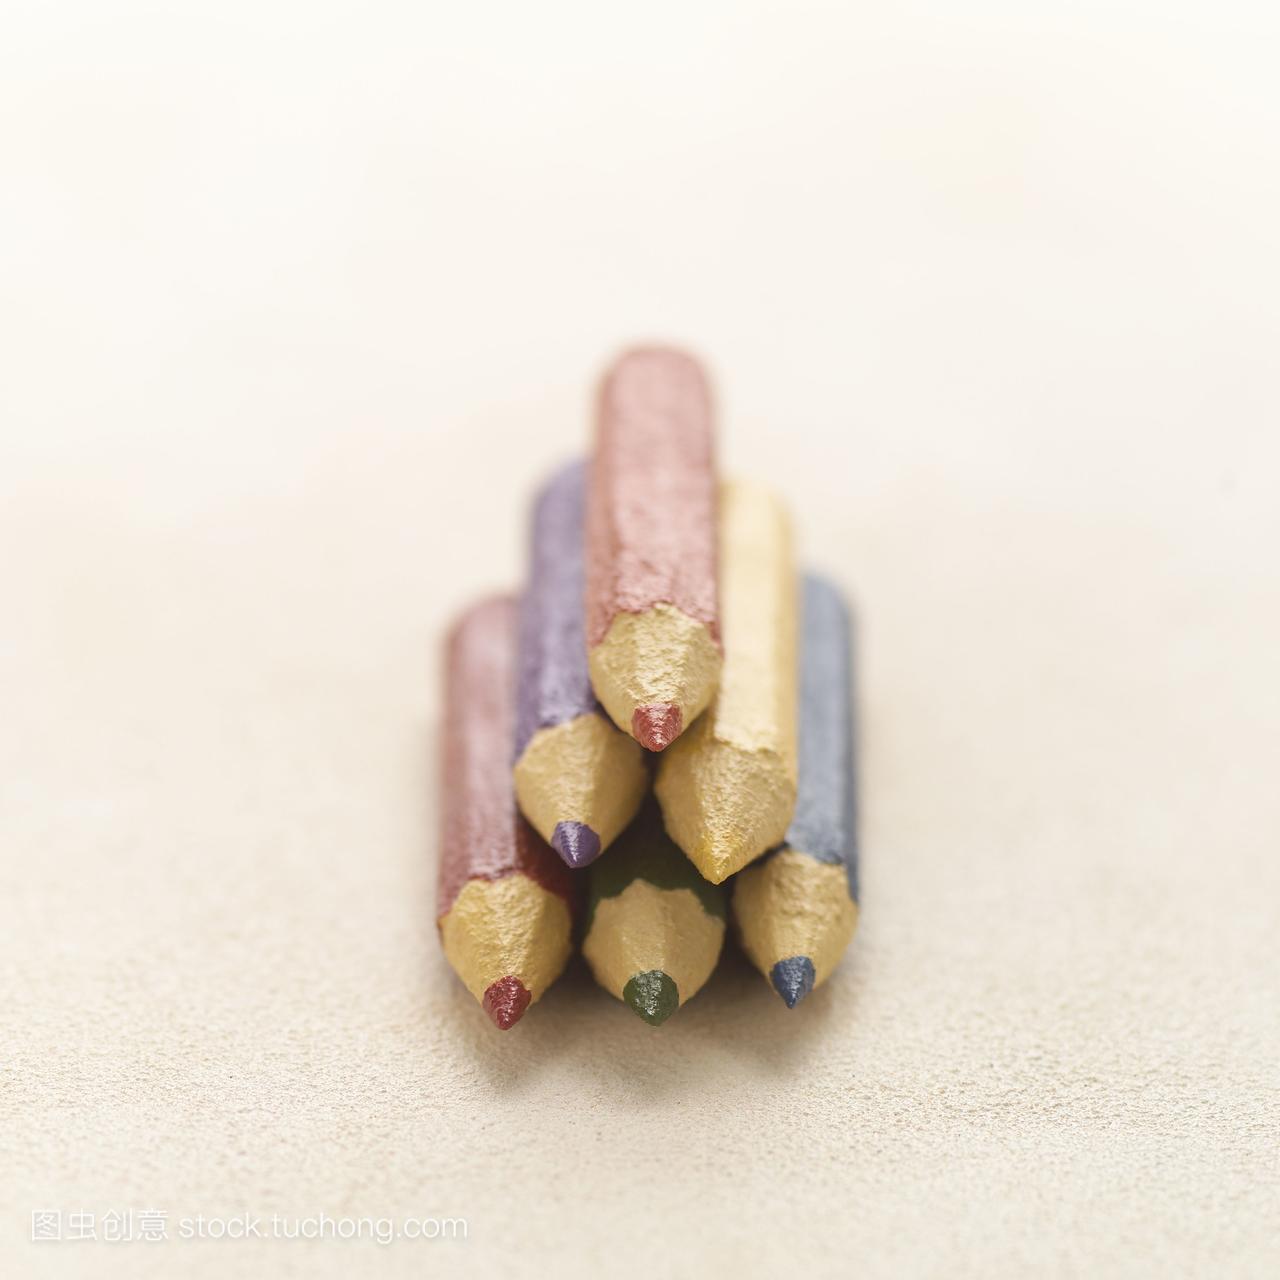 lustrations,still life,craft,colorful,miniature,pencil,